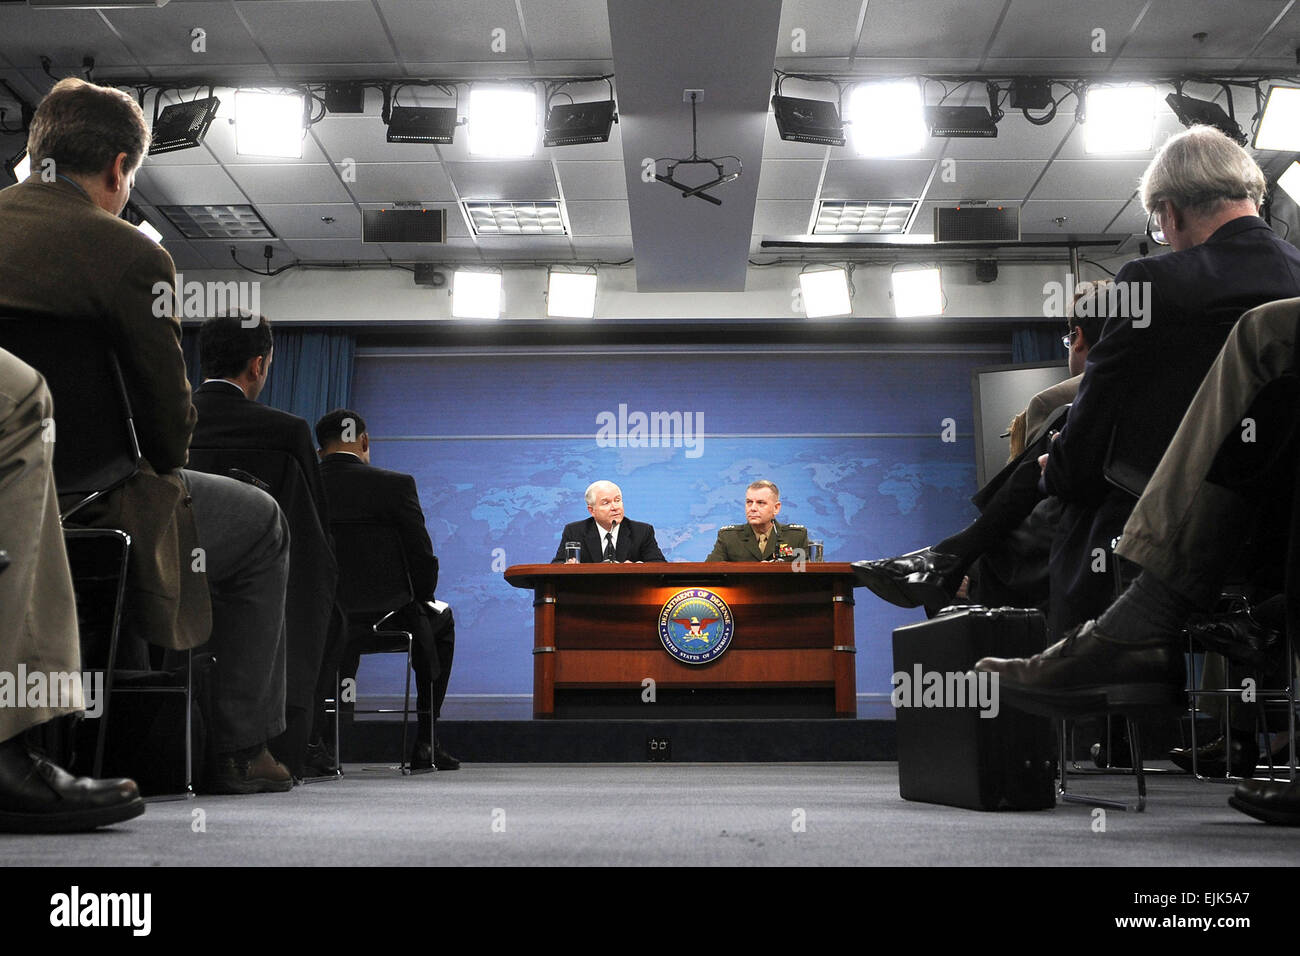 Secretary of Defense Robert M. Gates and Vice Chairman of the Joint Chiefs of Staff Gen. James Cartwright speak to members of the press about the fiscal year 2010 budget during a joint press availability at the Pentagon, April 6, 2009.  DOD photo by Cherie Cullen released  Gates says people take top priority in budget recommendations  /-news/2009/04/07/19334-gates-says-people-take-top-priority-in-budget-recommendations/index.html Stock Photo